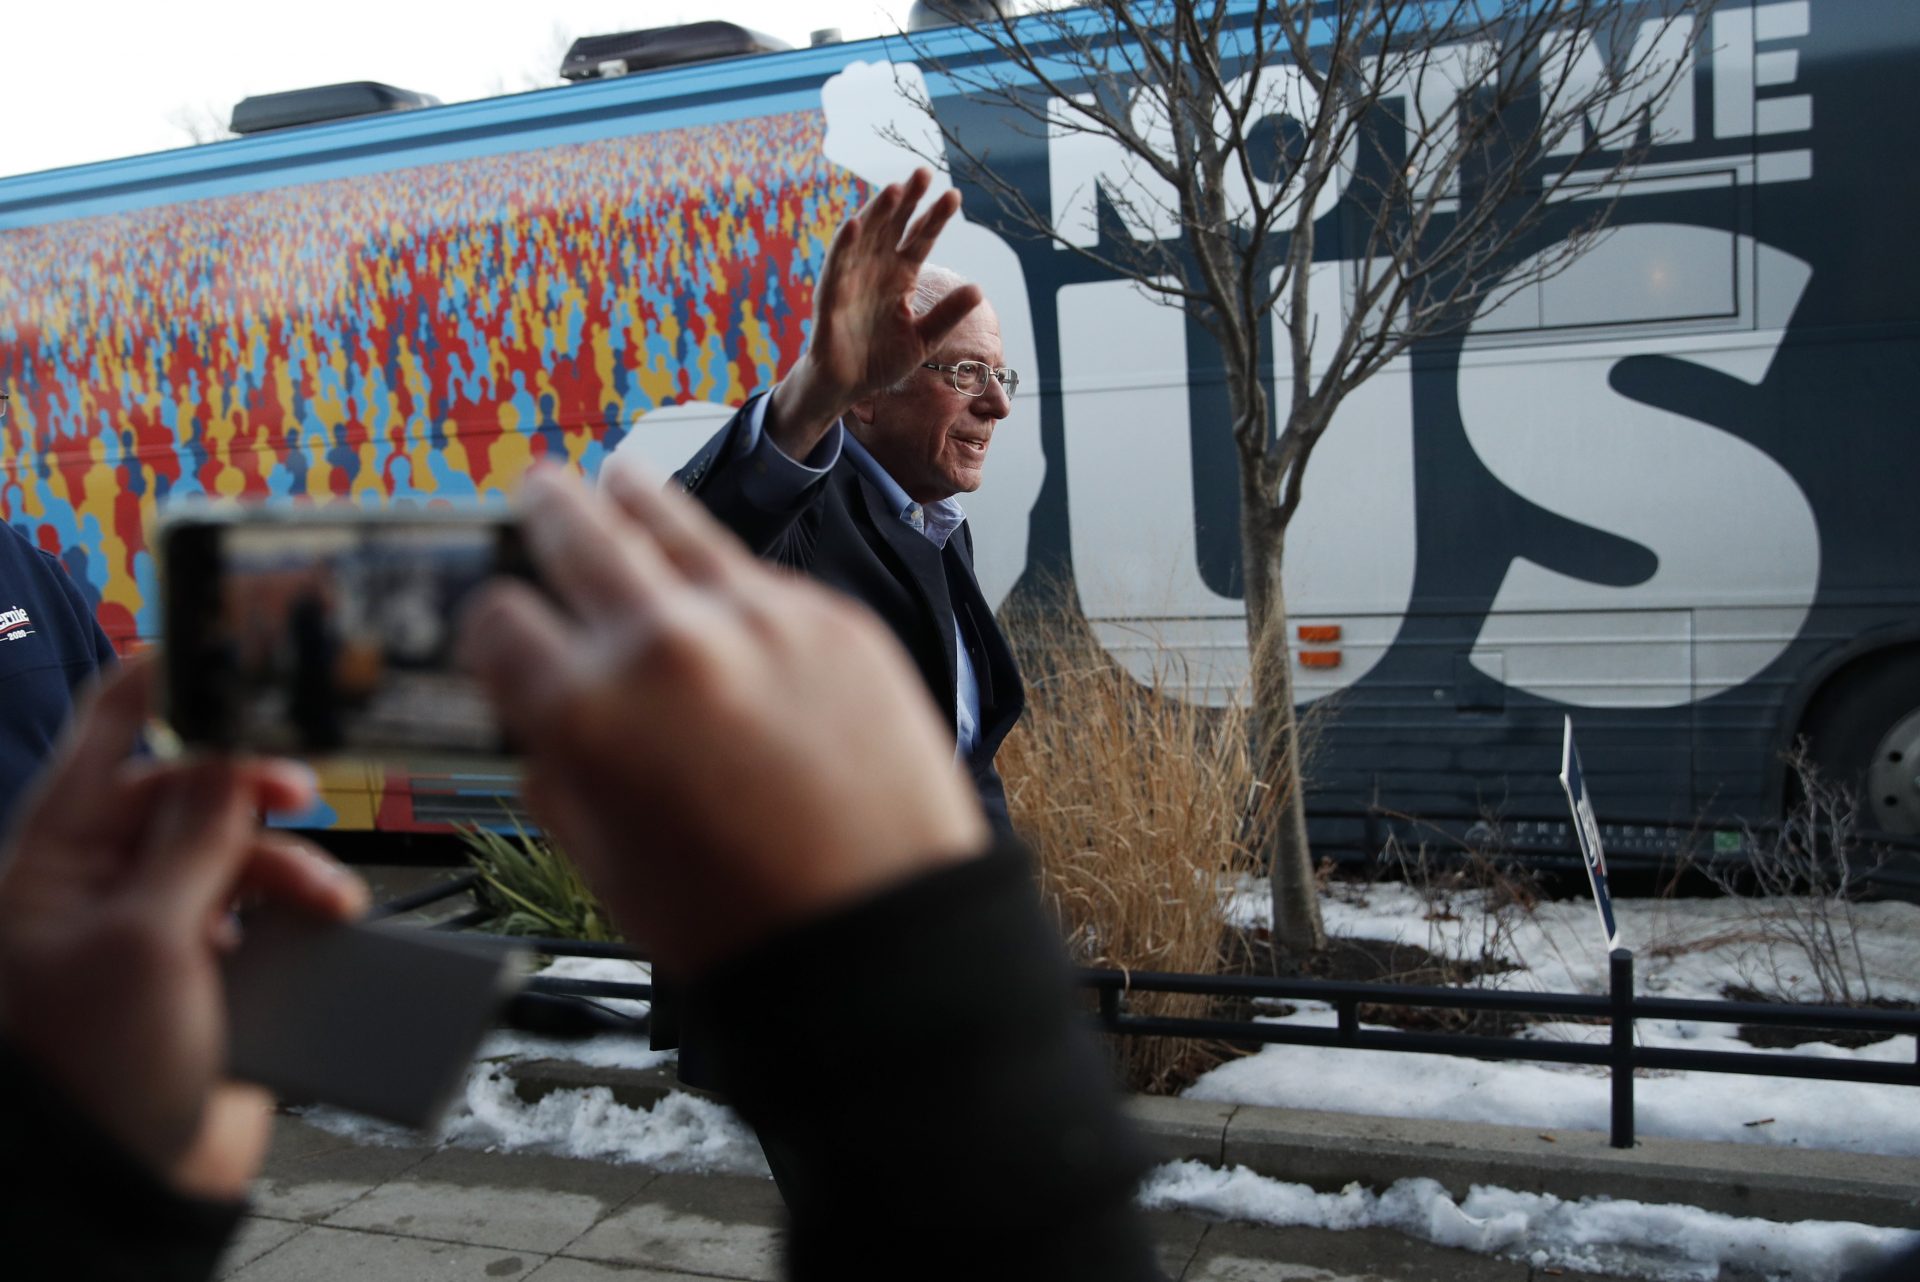 Democratic presidential candidate Sen. Bernie Sanders, I-Vt., waves as he leaves after speaking at a Super Bowl watch party campaign event, Sunday, Feb. 2, 2020, in Des Moines, Iowa.